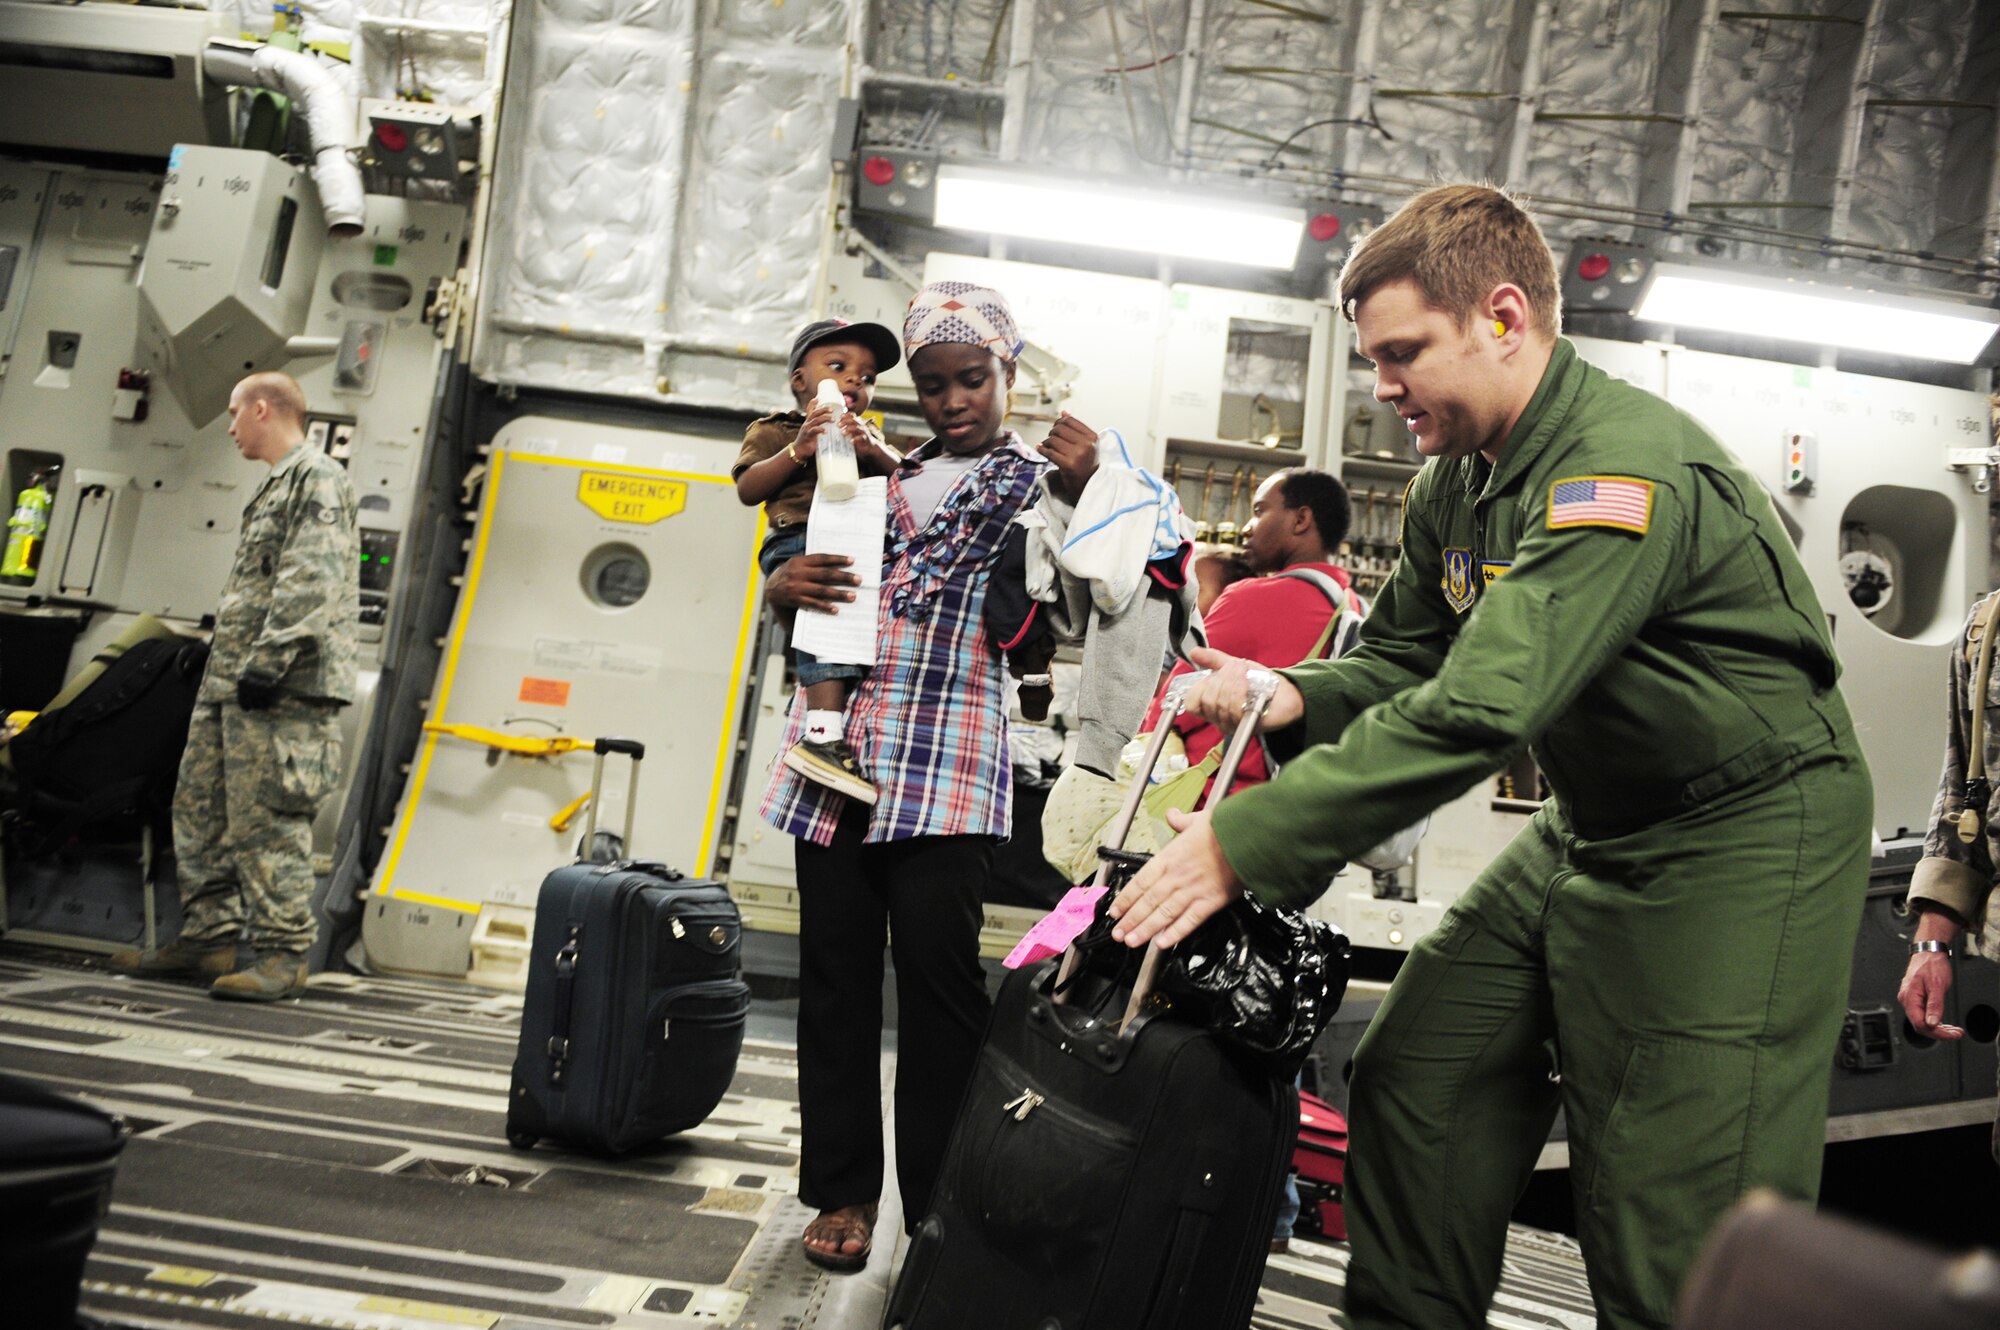 Tech Sgt. Andrew Lucas (left) assists Haitian-Americans Jan. 18, 2010 at Toussaint L'Ouverture International Airport in Port-au-Prince, Haiti. Sergeant Lucas is a loadmaster assigned to the 729th Airlift Squadron at March Air Reserve Base, Calif. (U.S. Air Force photo/Staff Sgt. Jacob N. Bailey) 